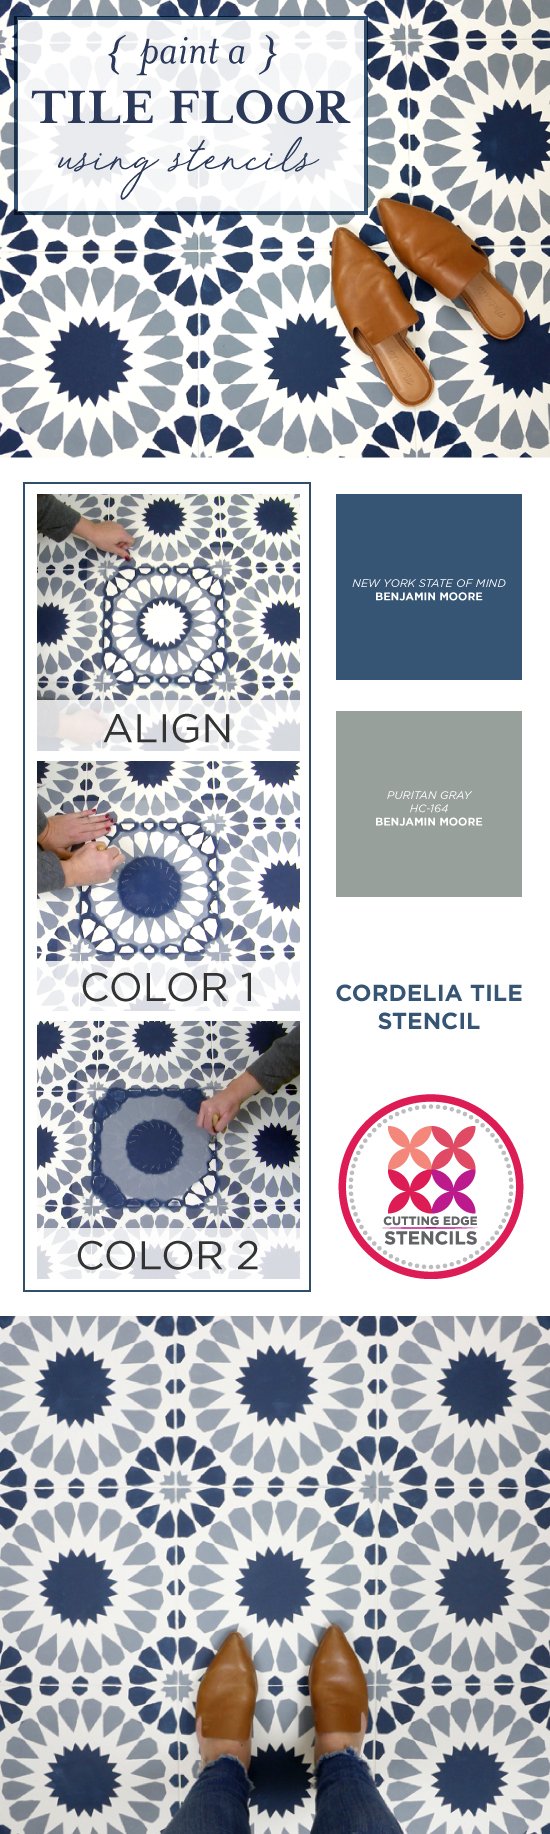 Cutting Edge Stencils shares how to stencil a tile floor using the Cordelia Tile Stencil in Benjamin Moore Blue and Gray. http://www.cuttingedgestencils.com/cordelia-tile-stencil-moroccan-design-cement-tiles.html